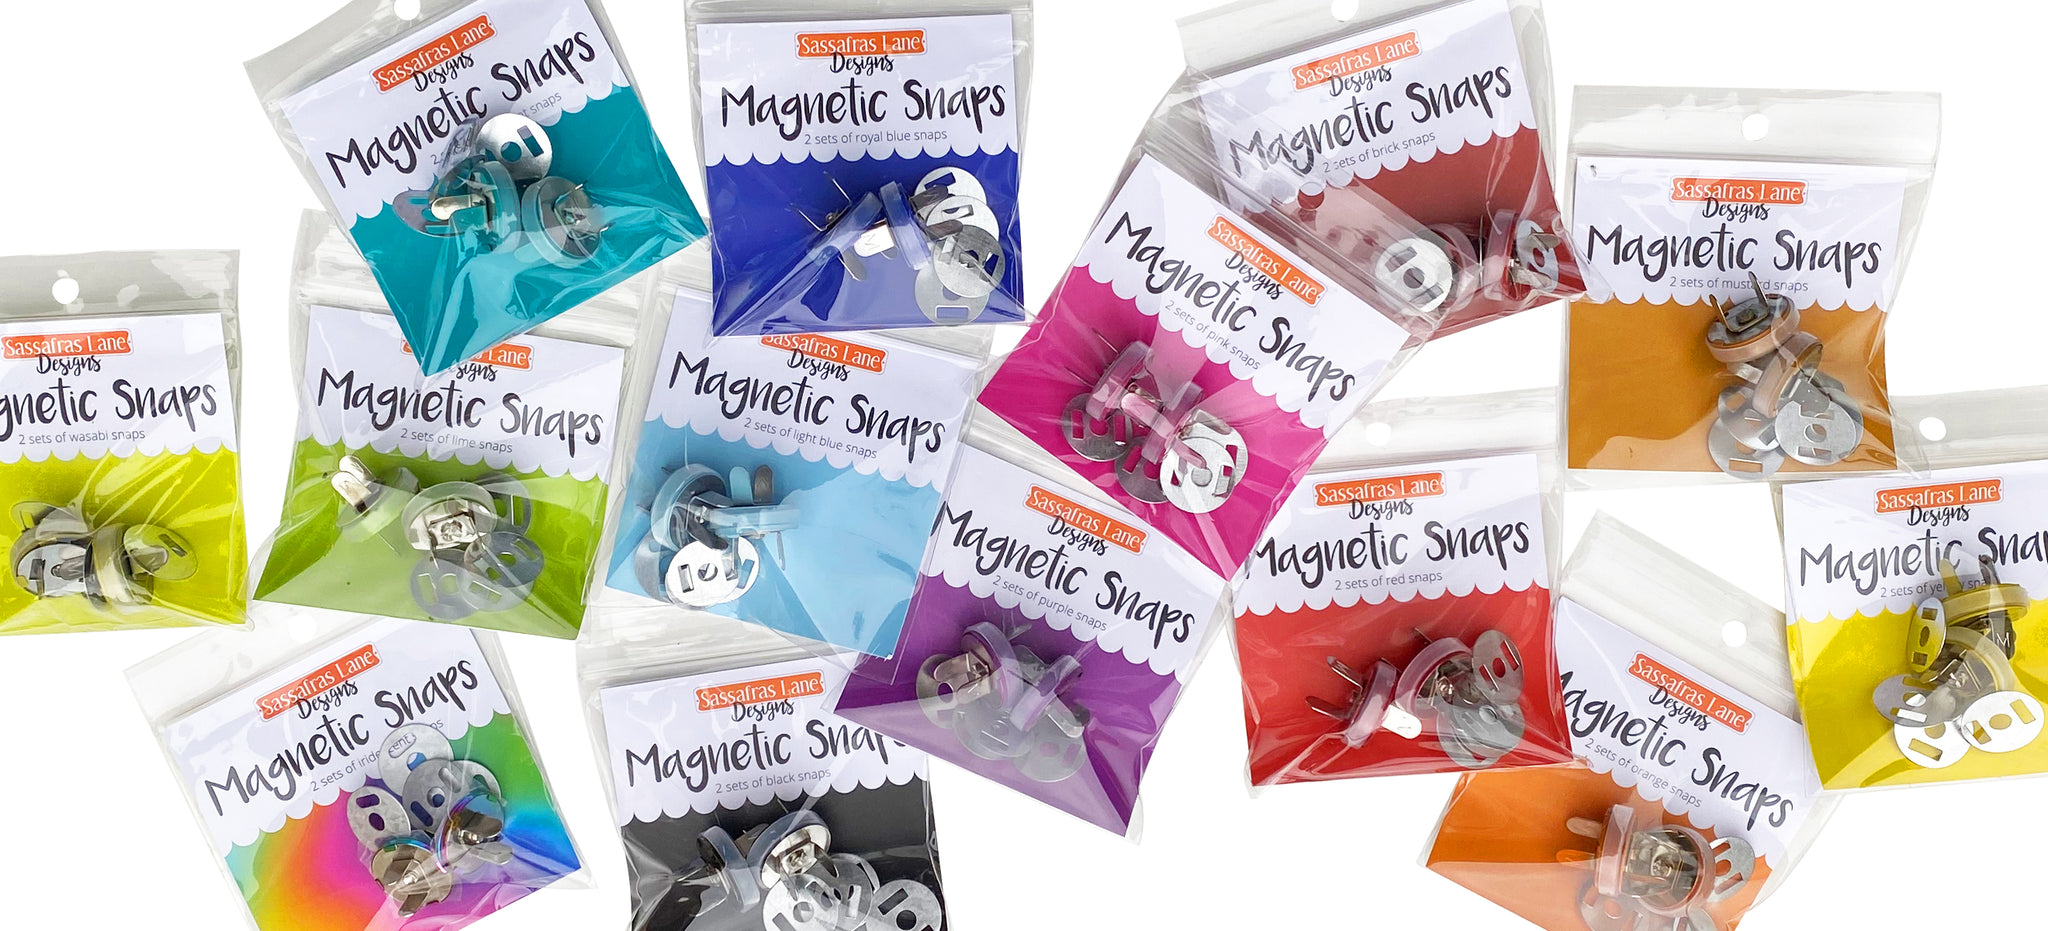 Introducing Colorful Magnetic Snaps